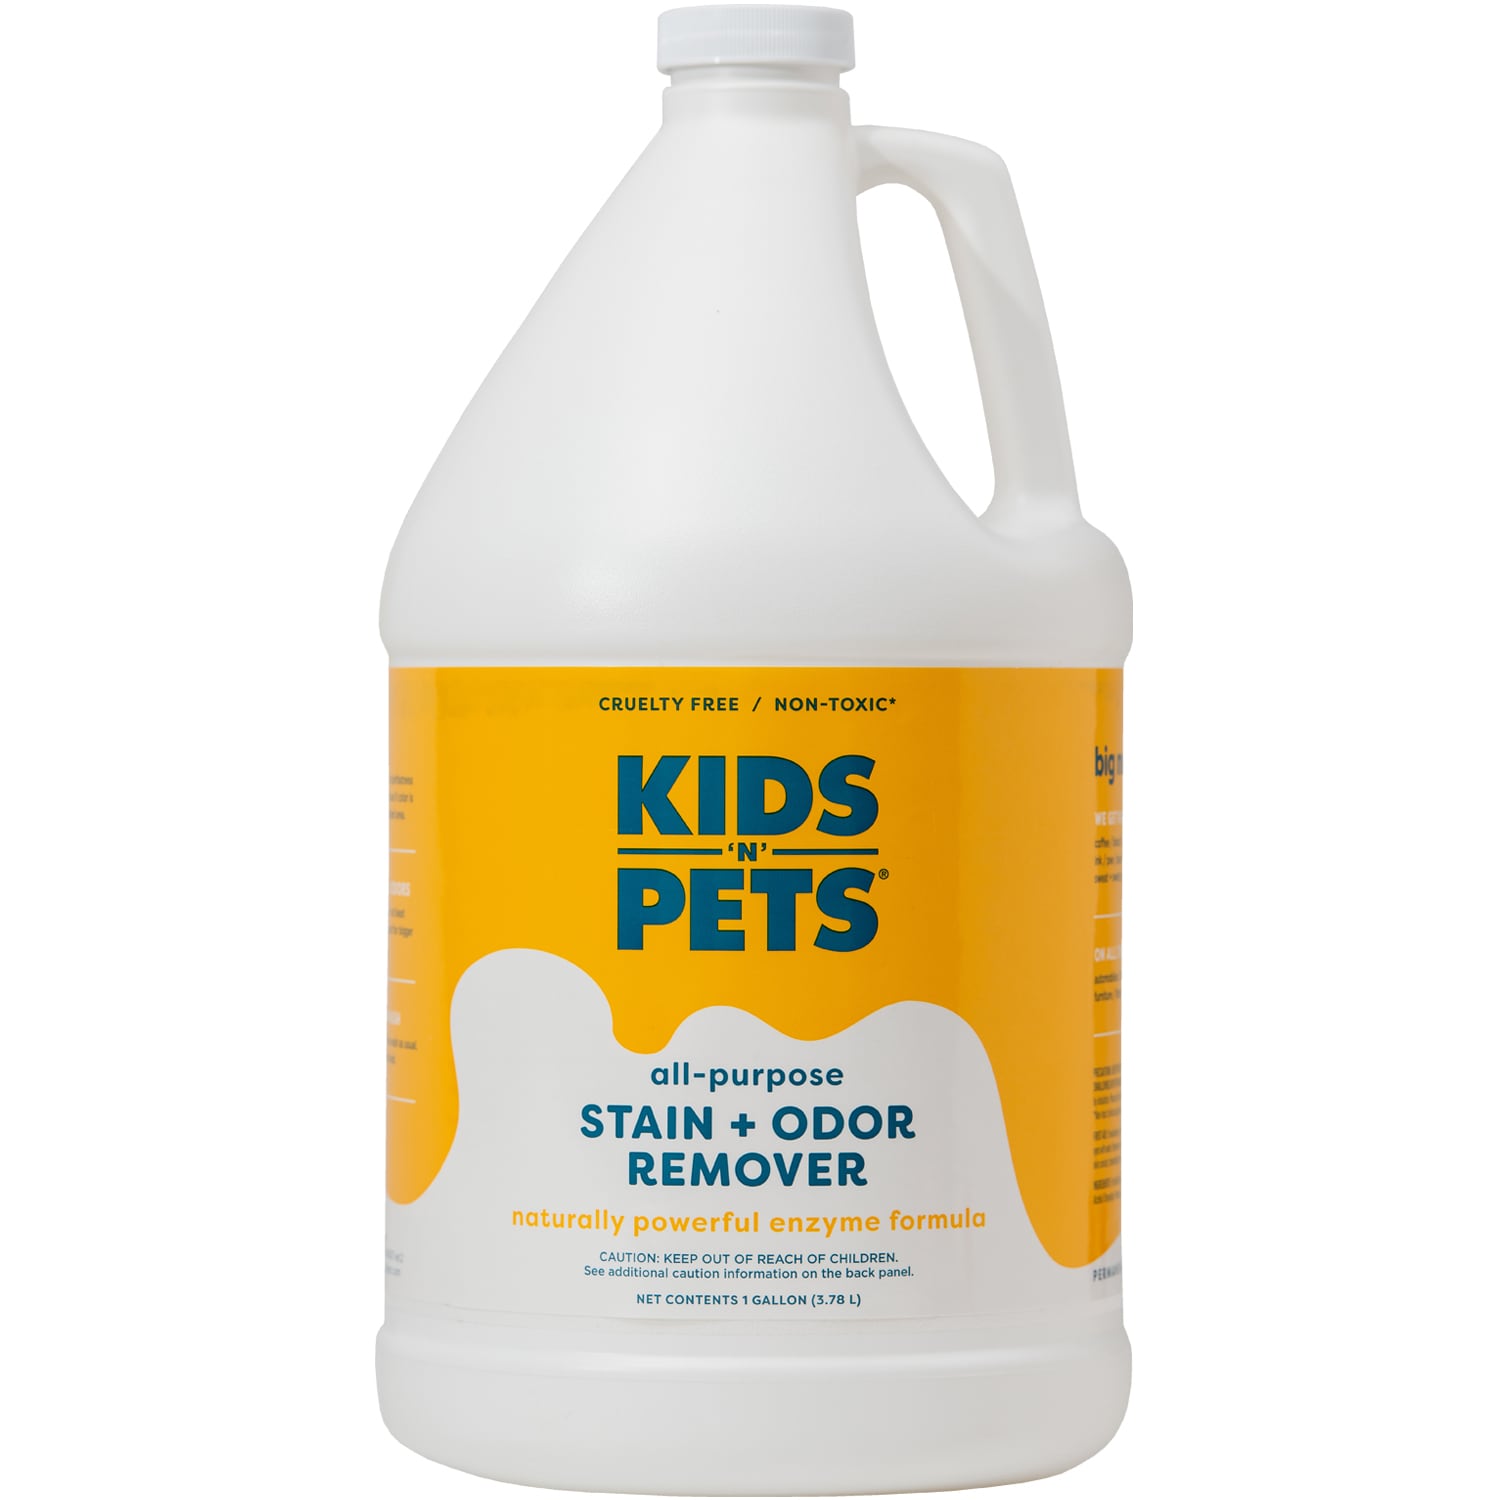 KIDS'N'PETS Stain Remover In The Deodorizers Stain Removers